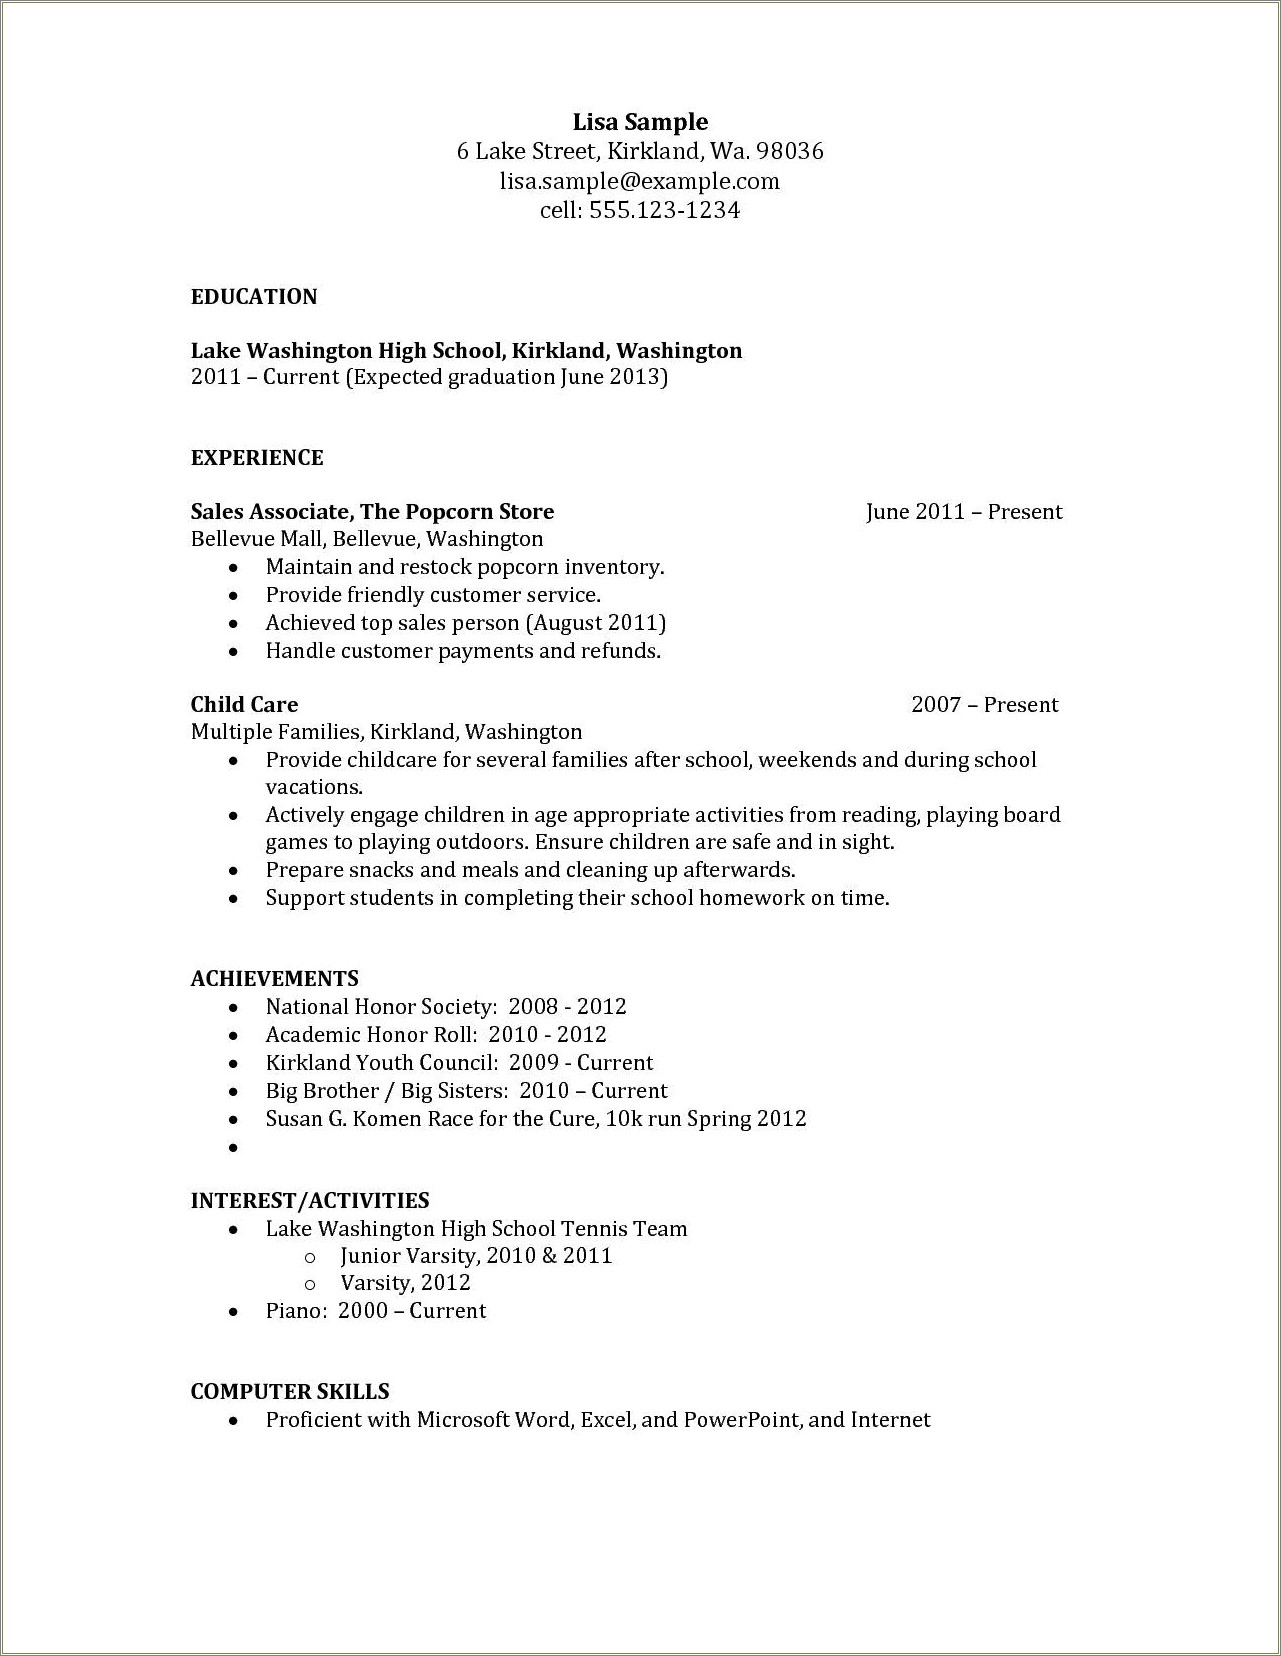 Resume For A Graduate Of High School